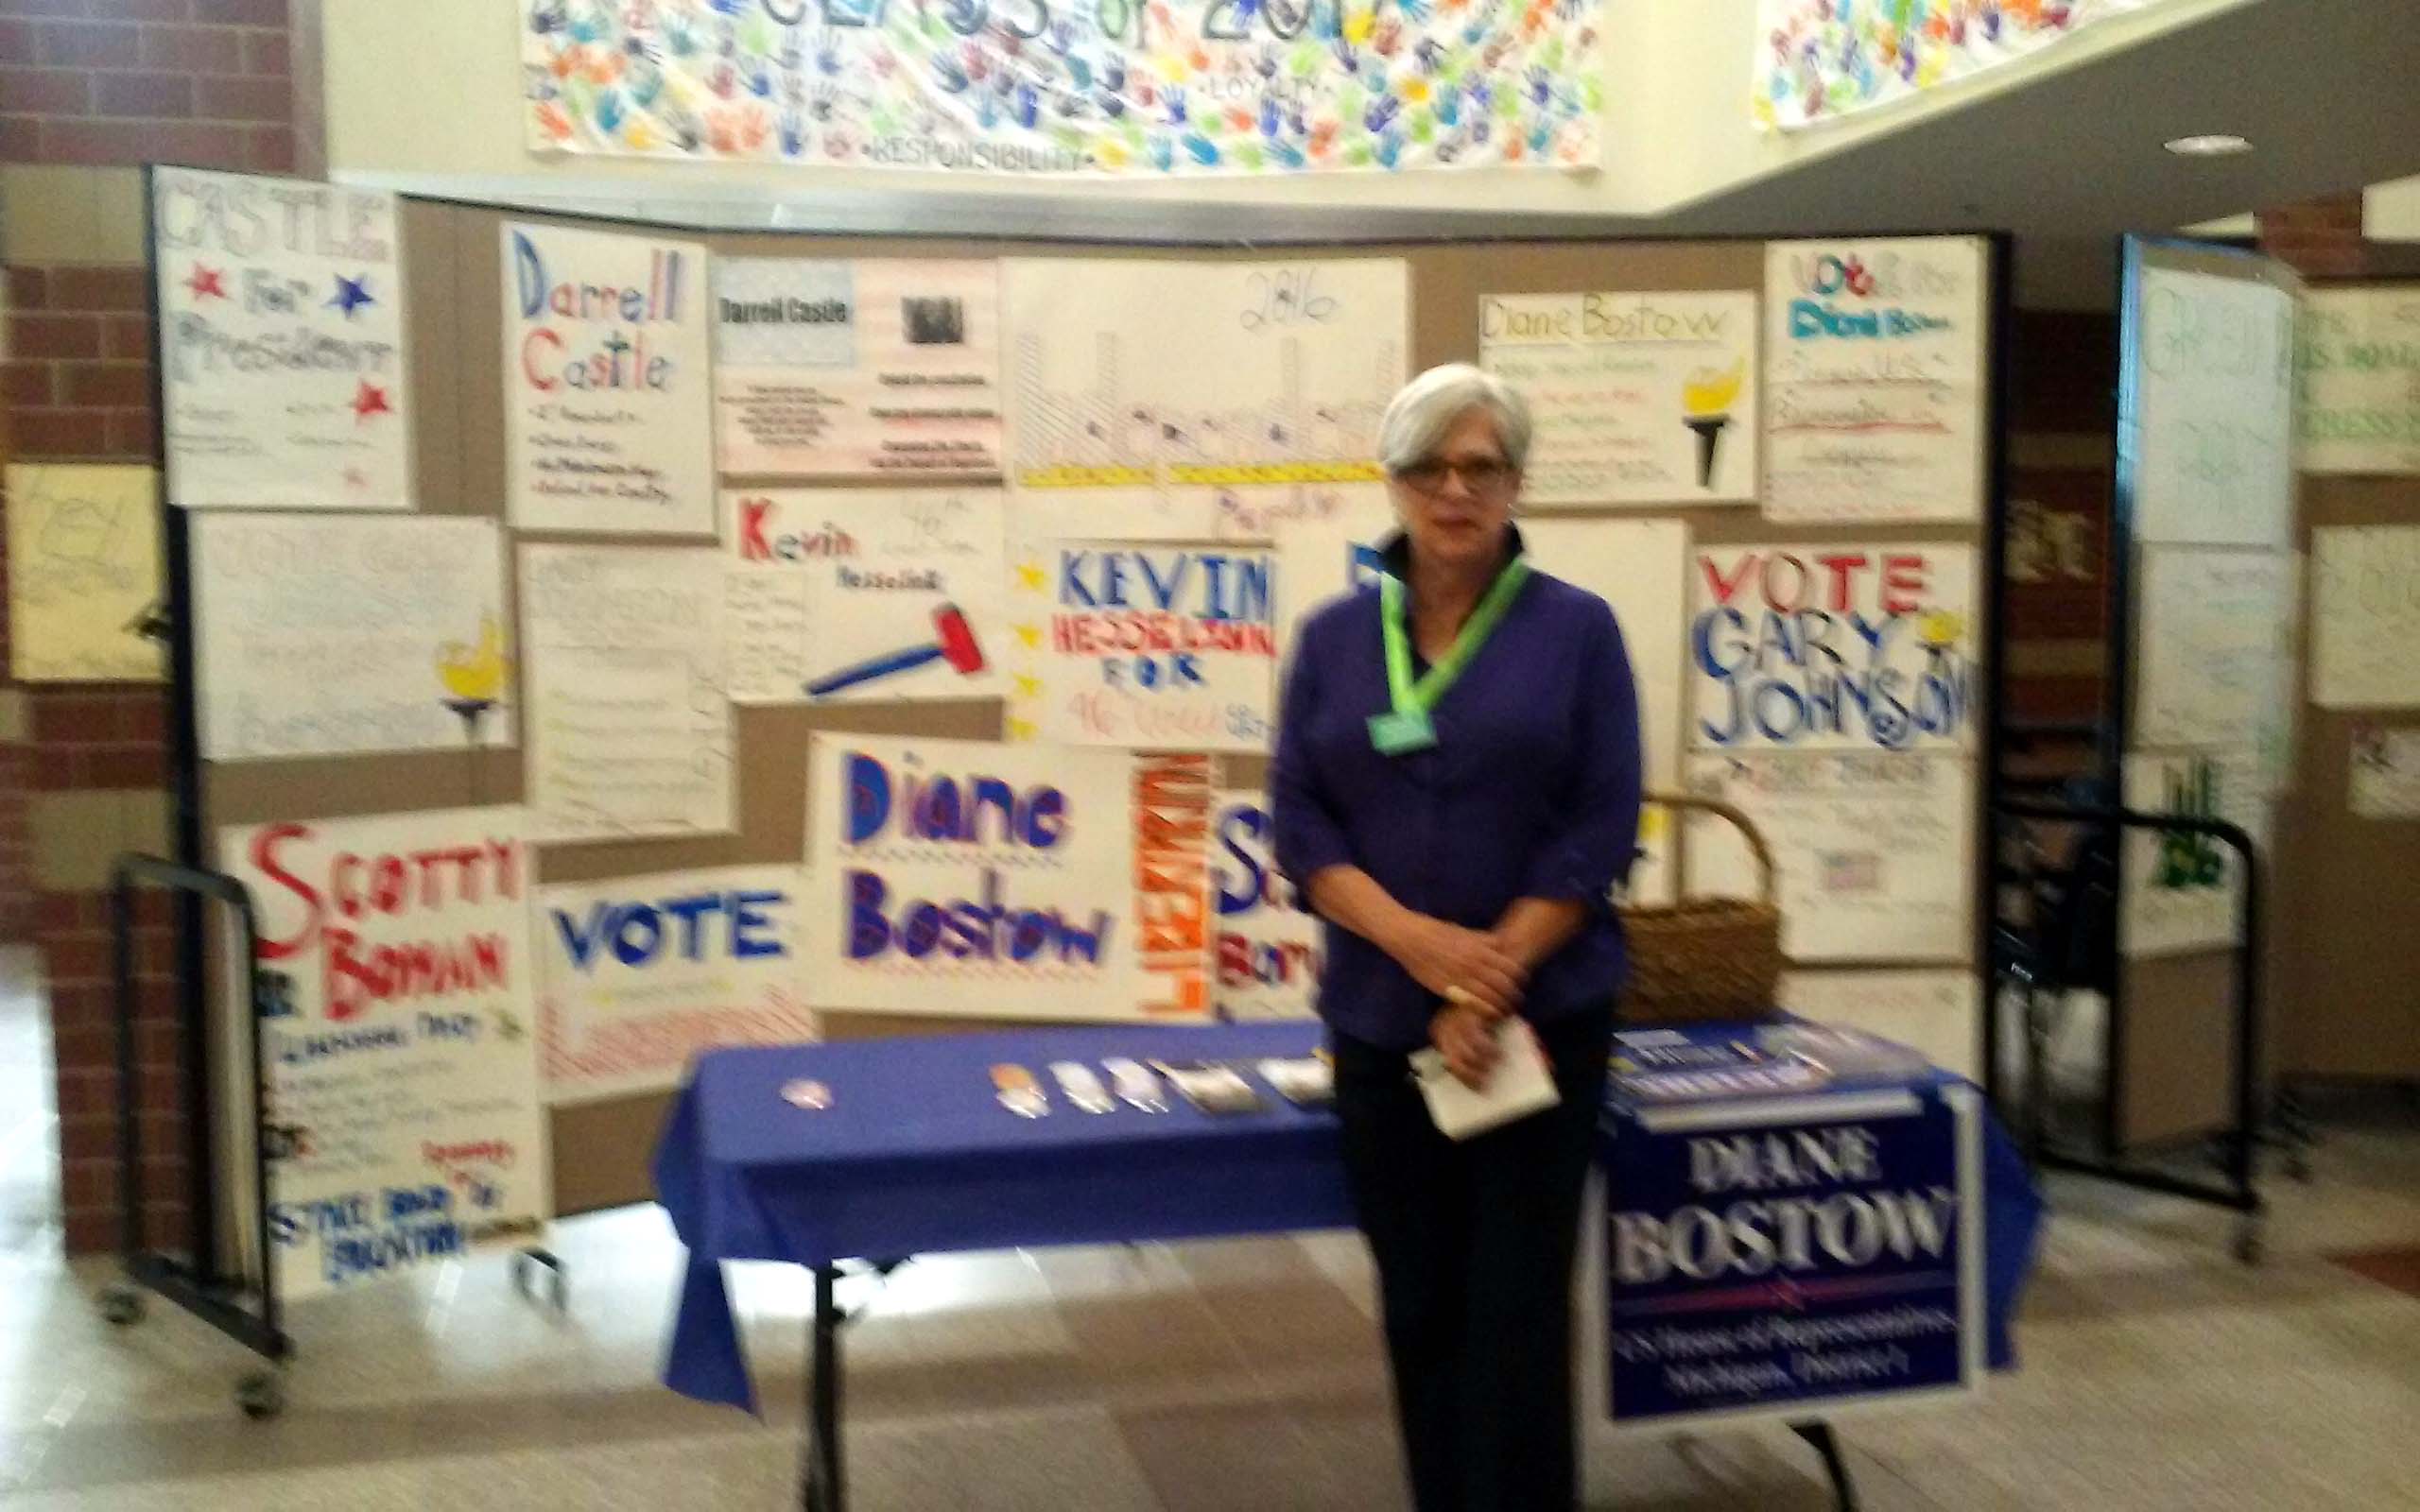 US House candidate Diane Bostow stands in student created display at Gaylord High School